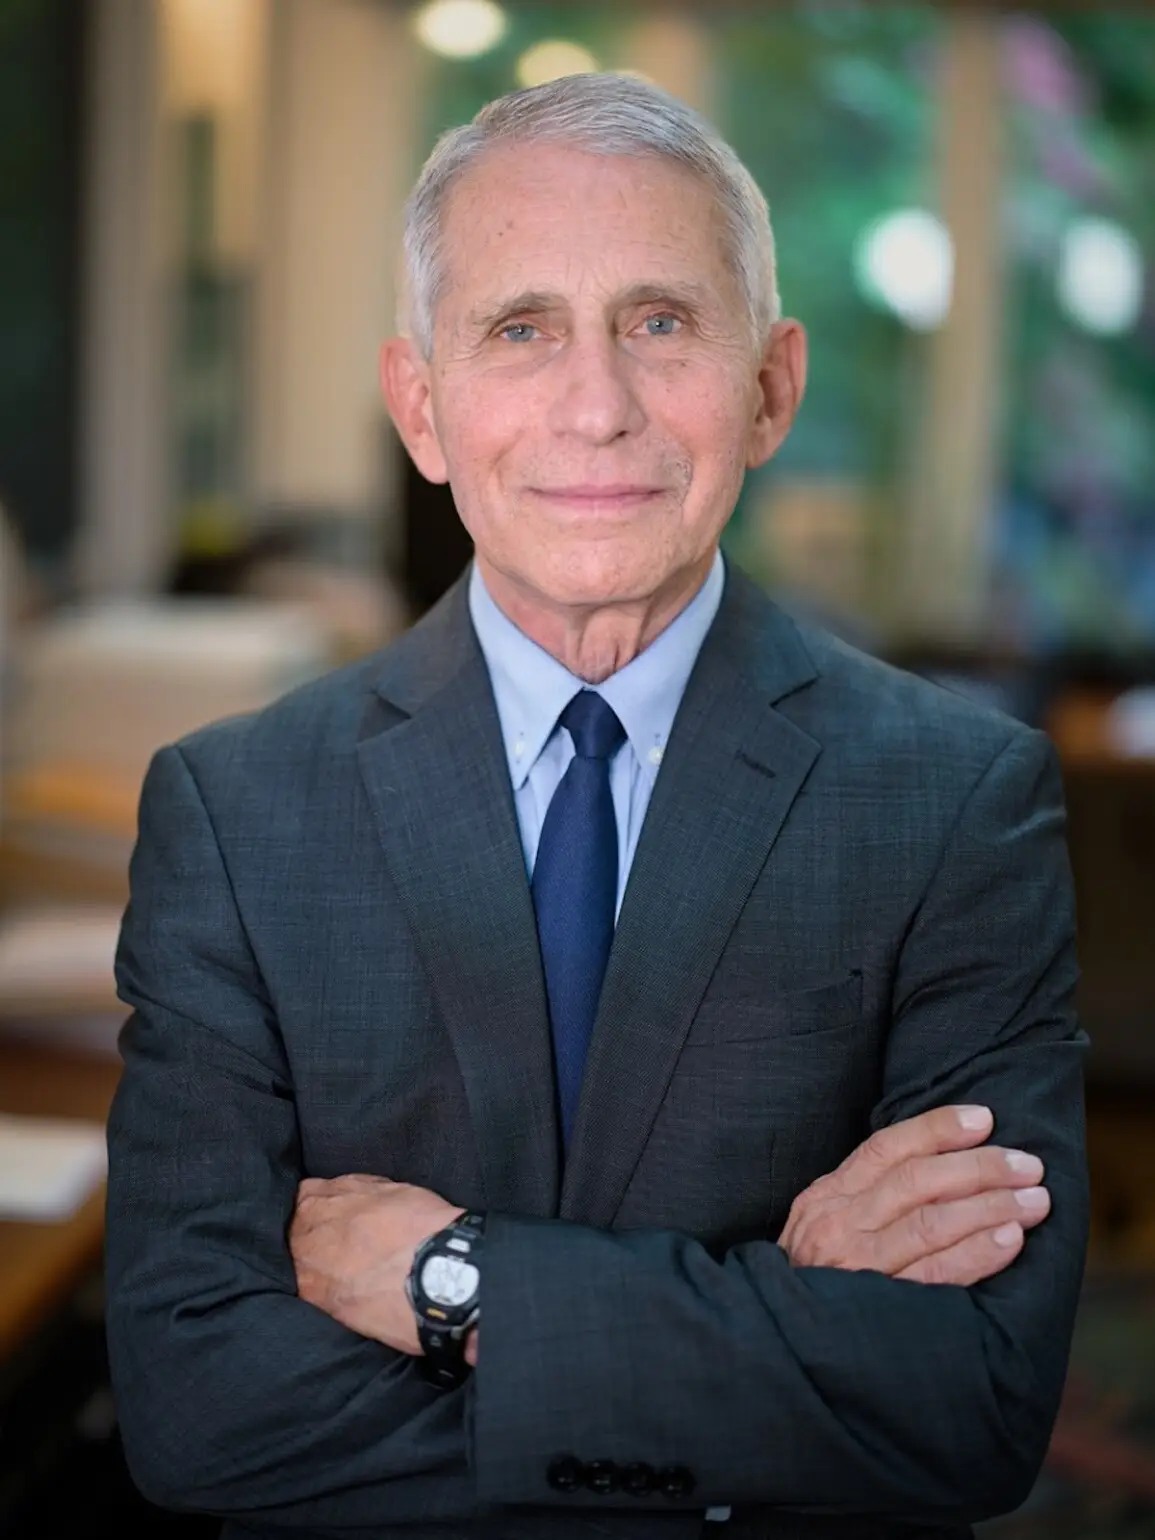 Dr. Anthony Fauci poses in preparation for June event at Book Passage in Marin County